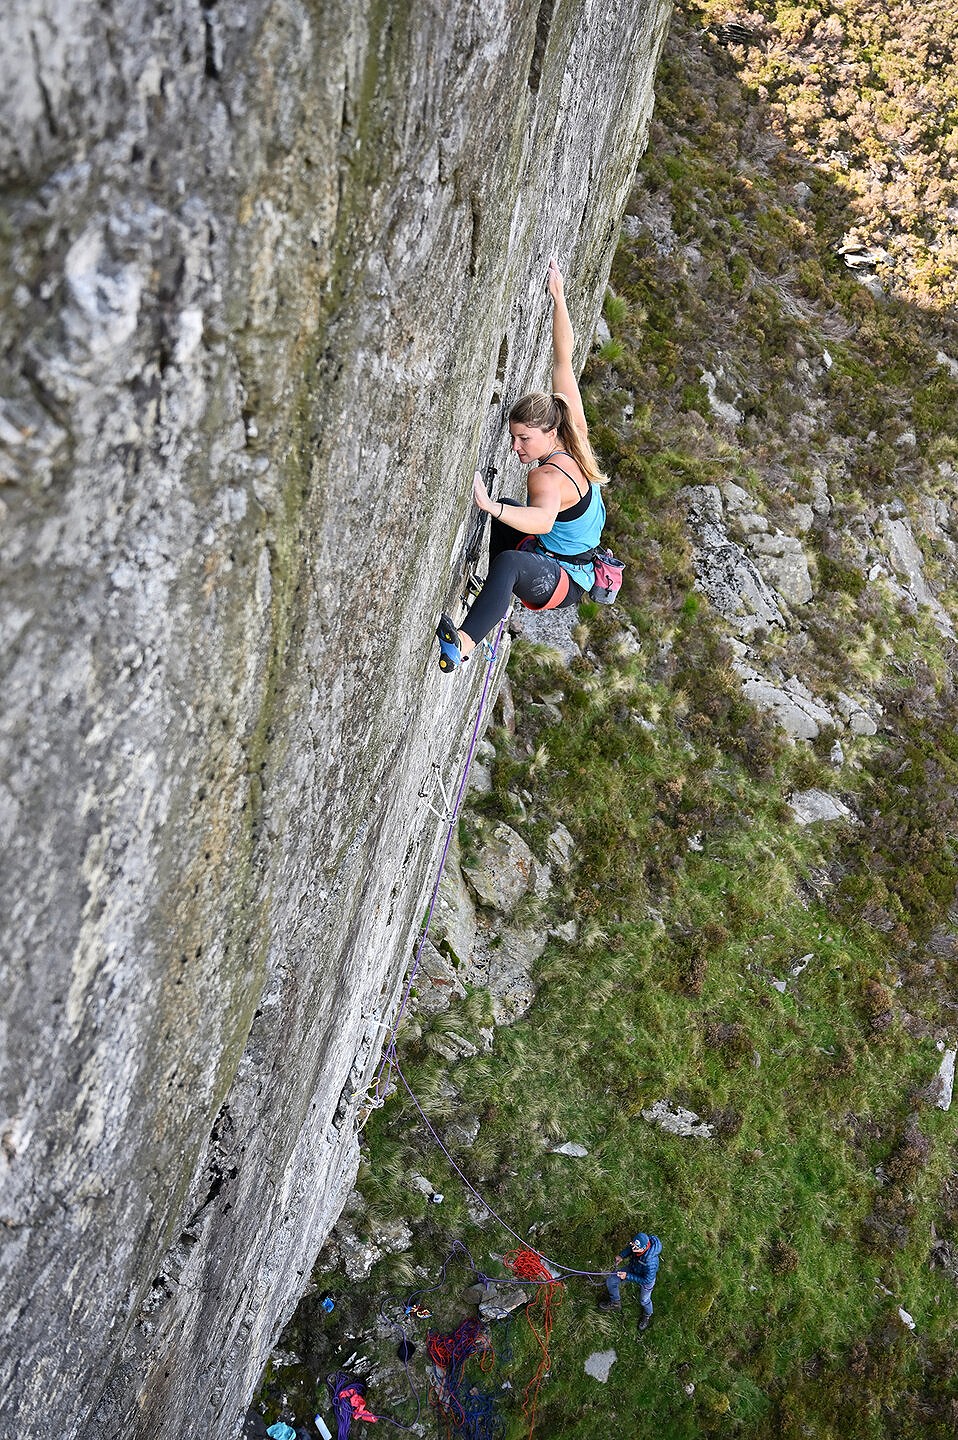 Hazel Findlay on Mission Impossible E9 7a.   © Ray Wood